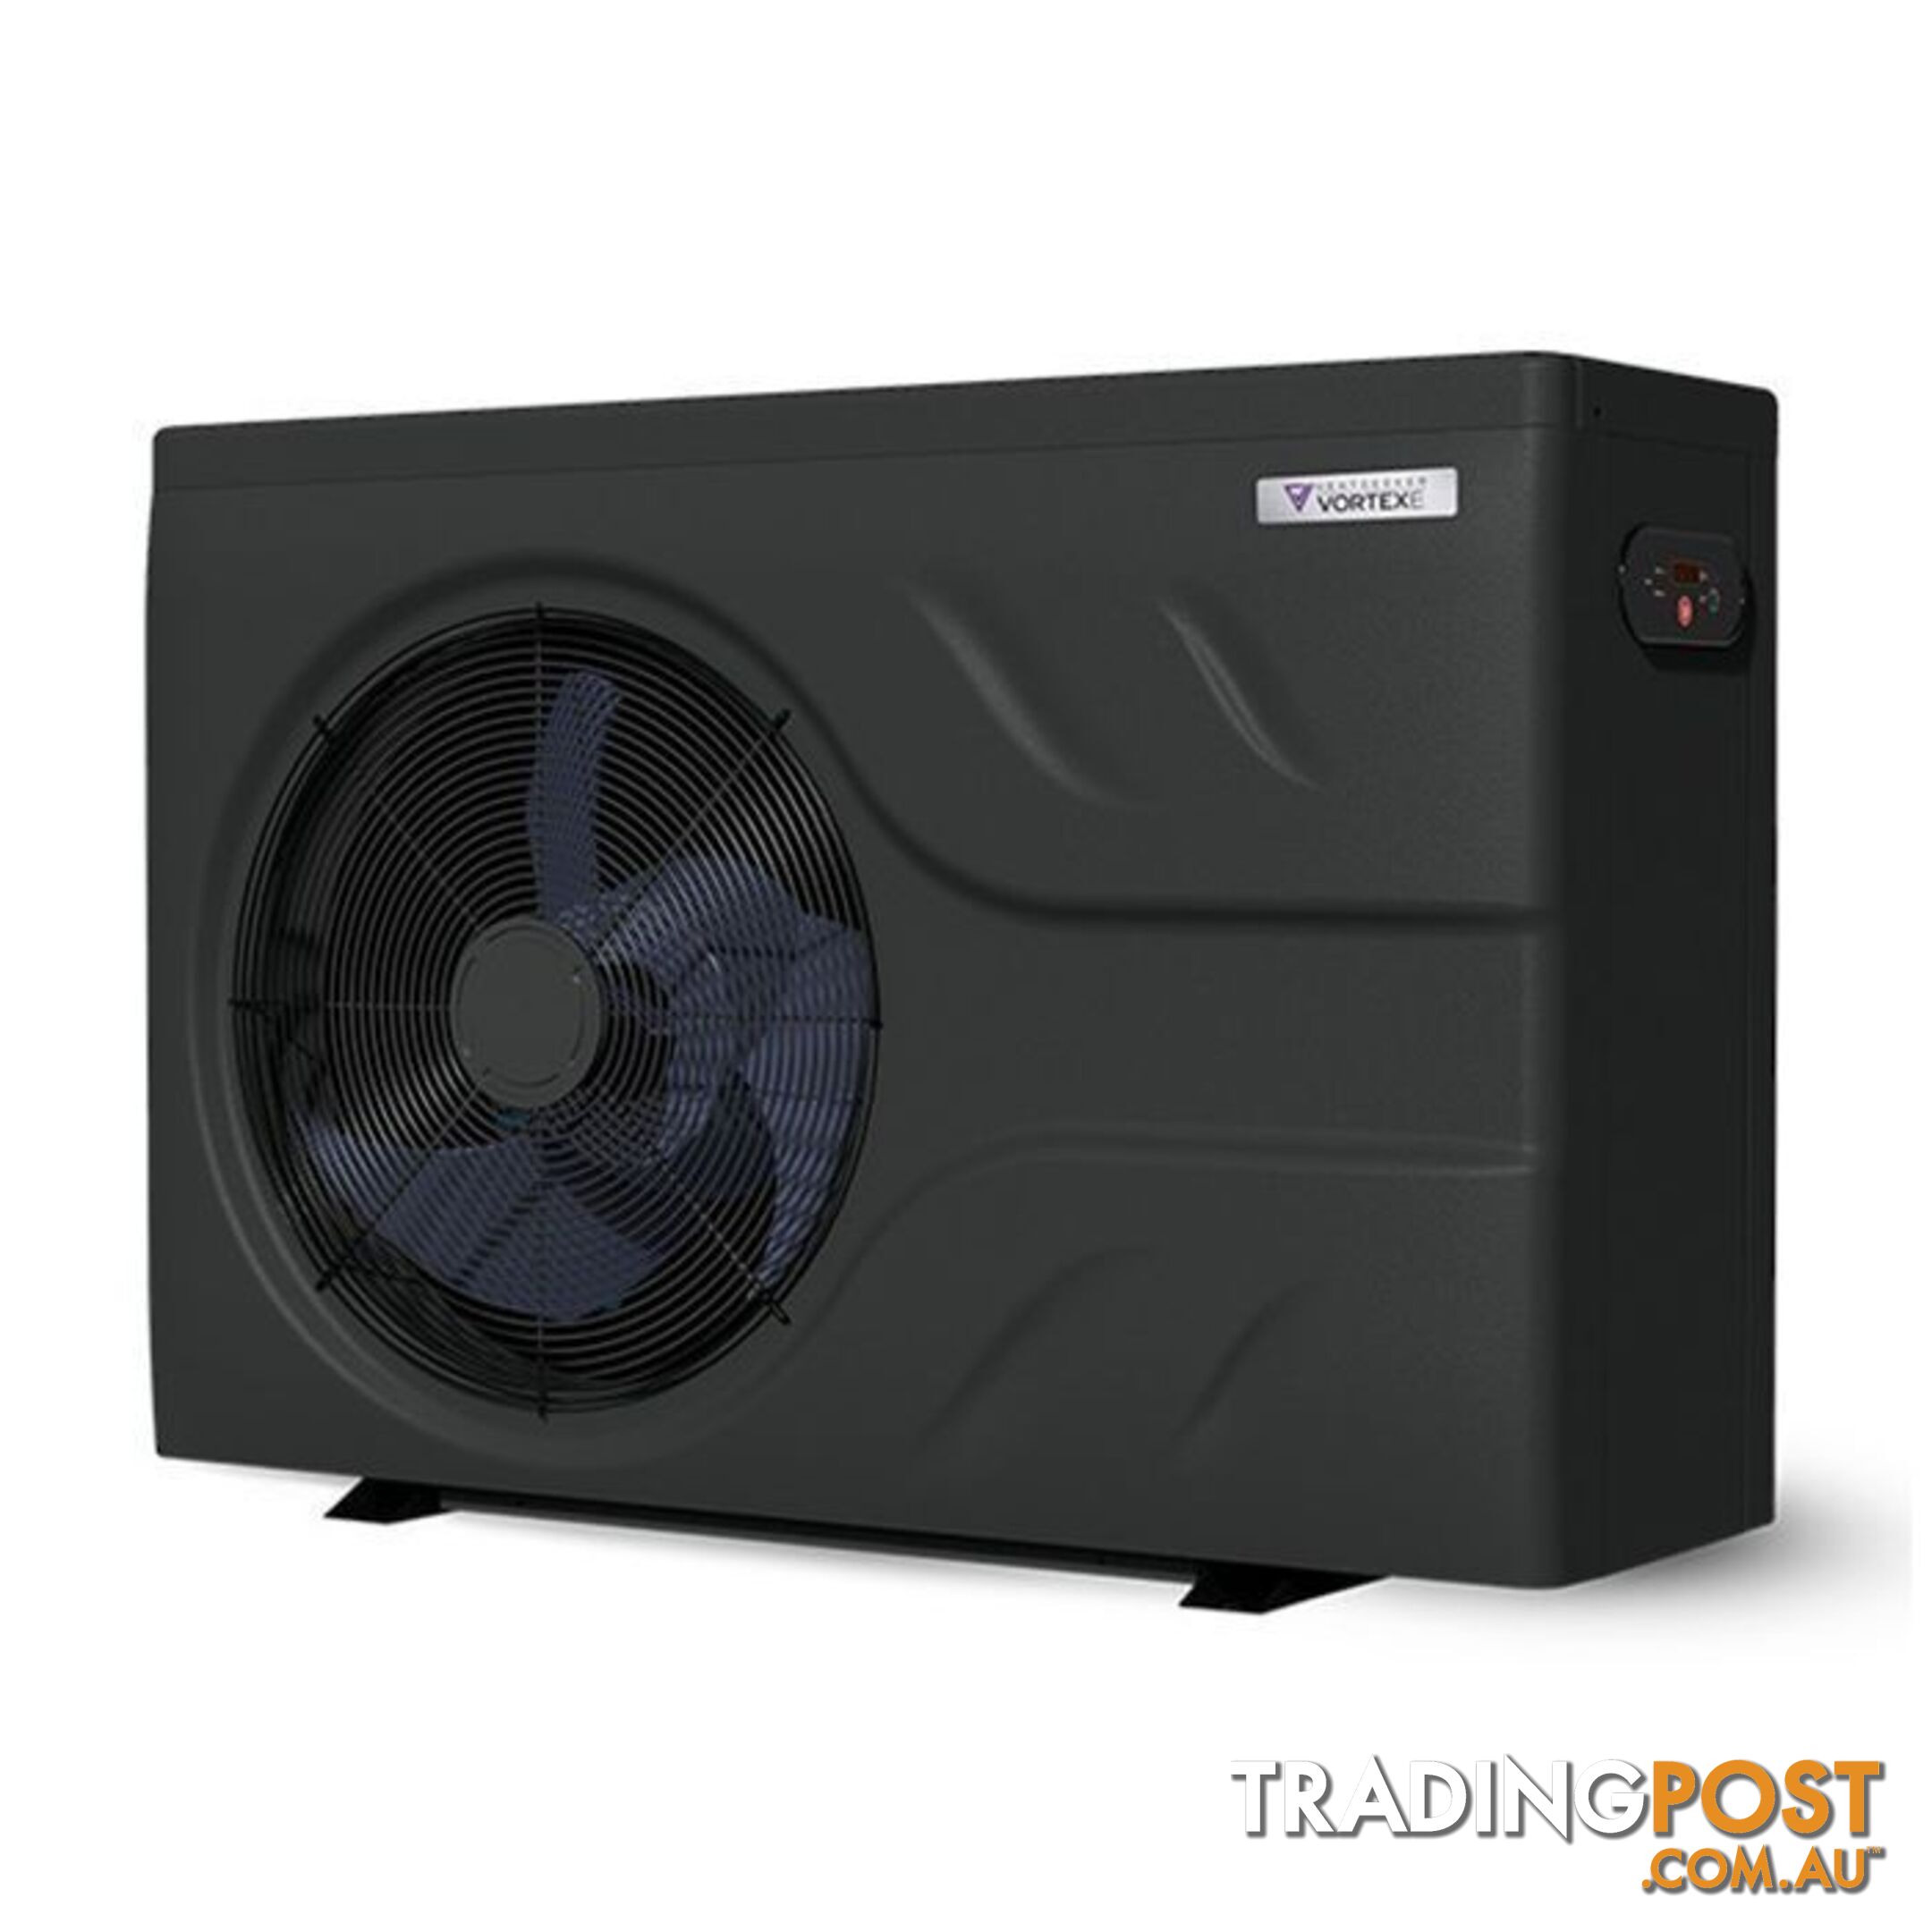 Last Chance to get 13 kw Vortex E Pool Heaters for $2399